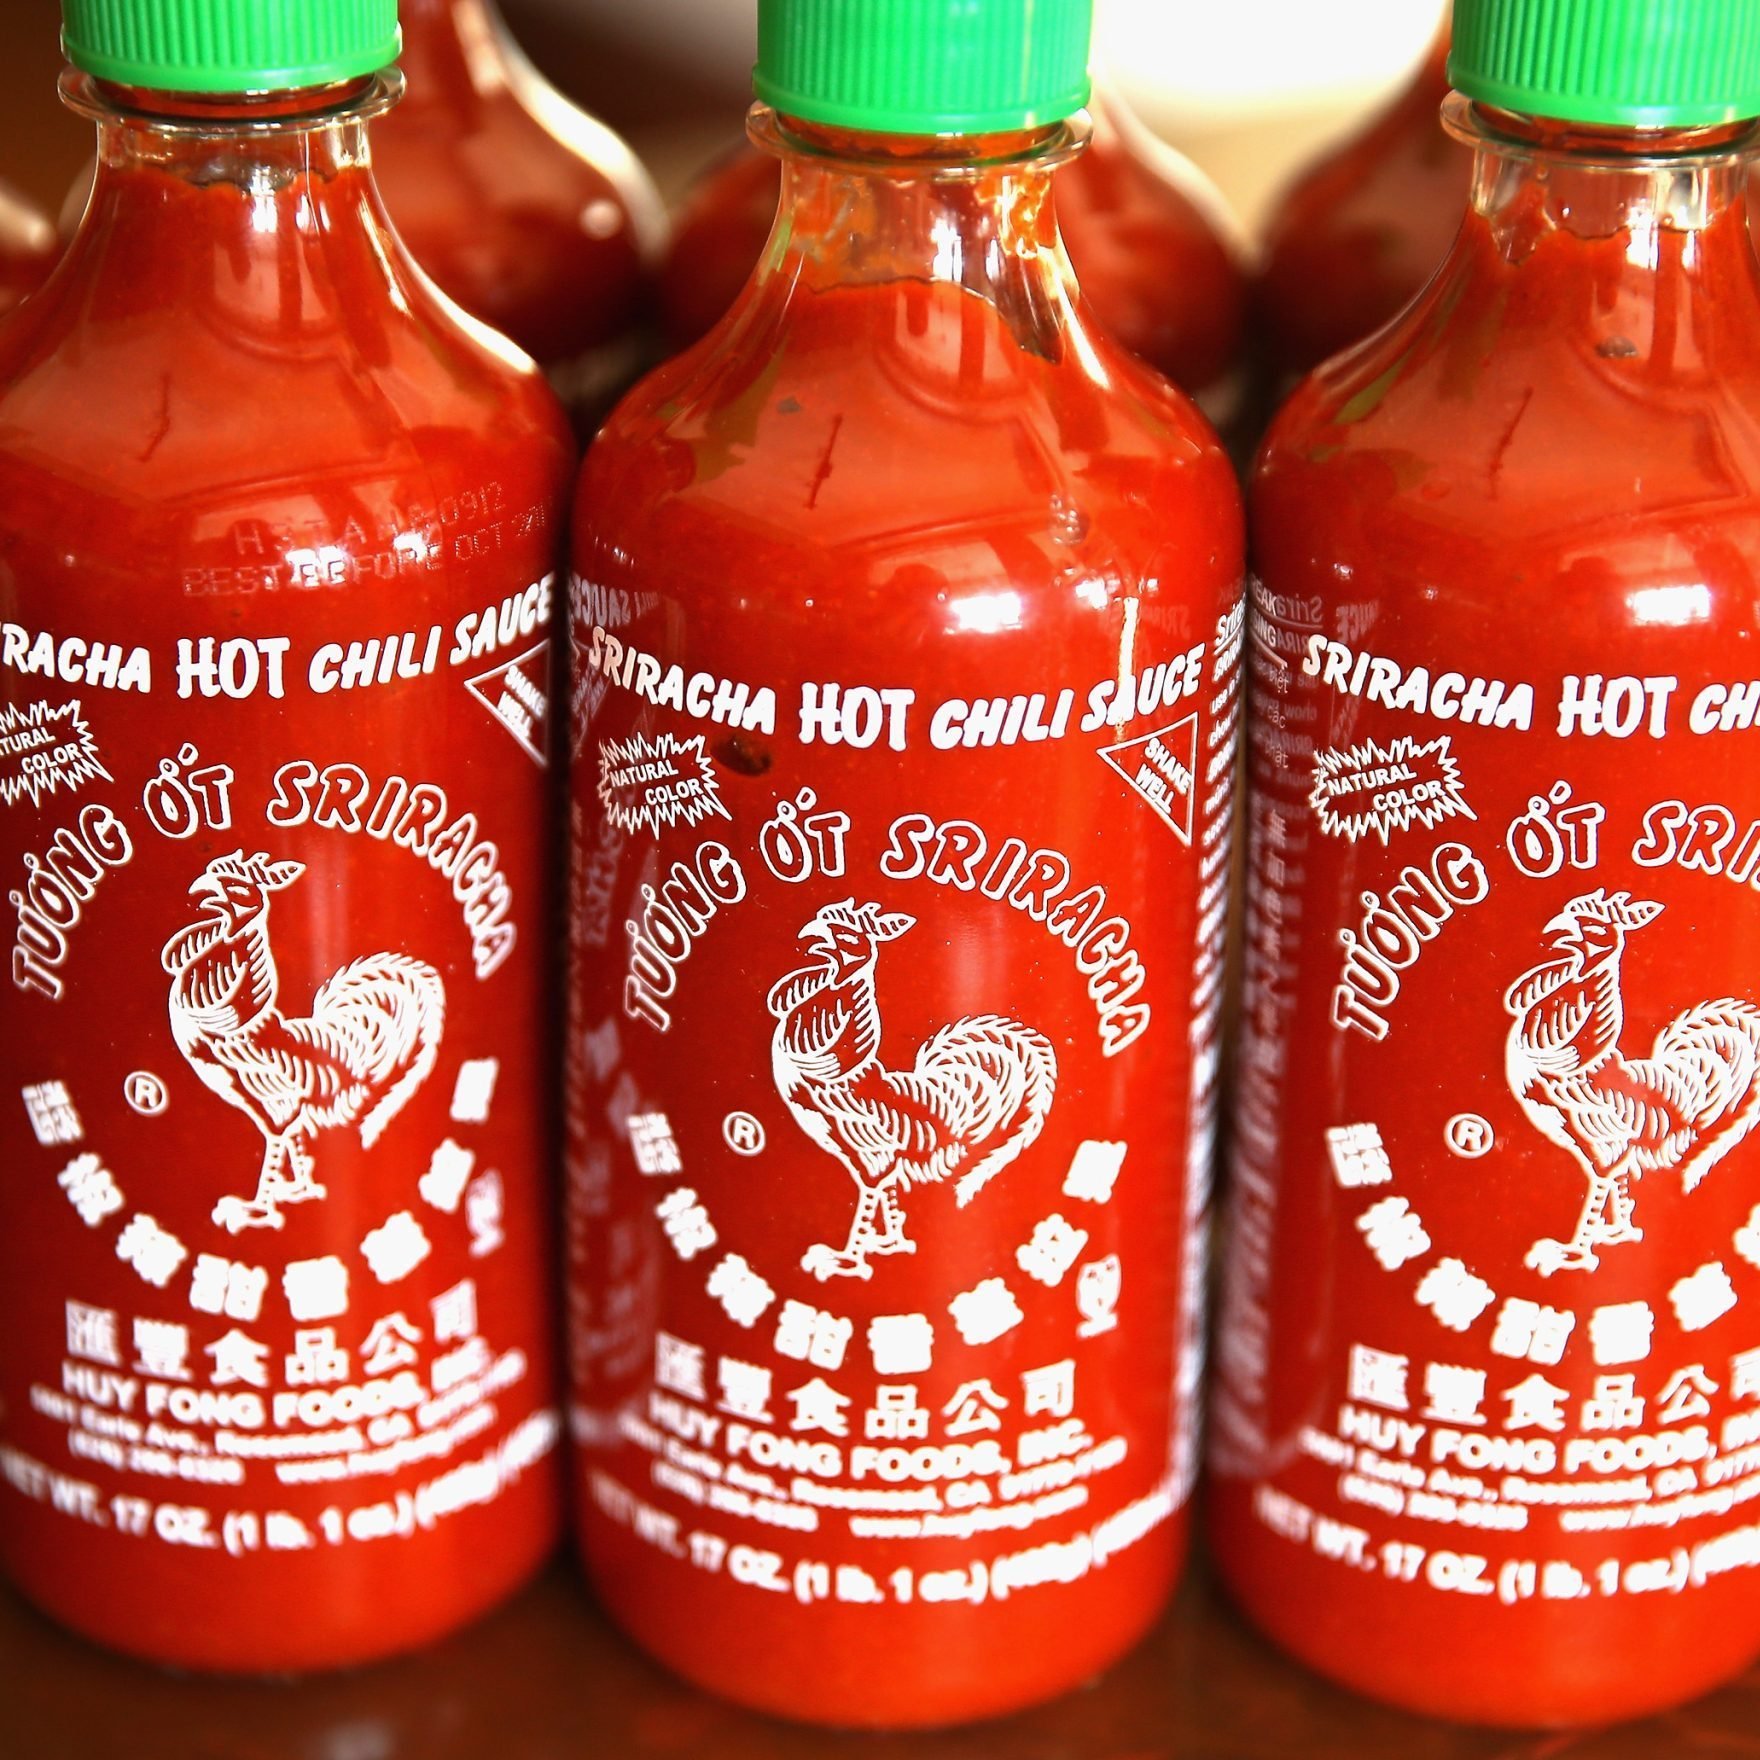 Sriracha Ordered By Department Of Public Health To Hold Shipments For 35 Days